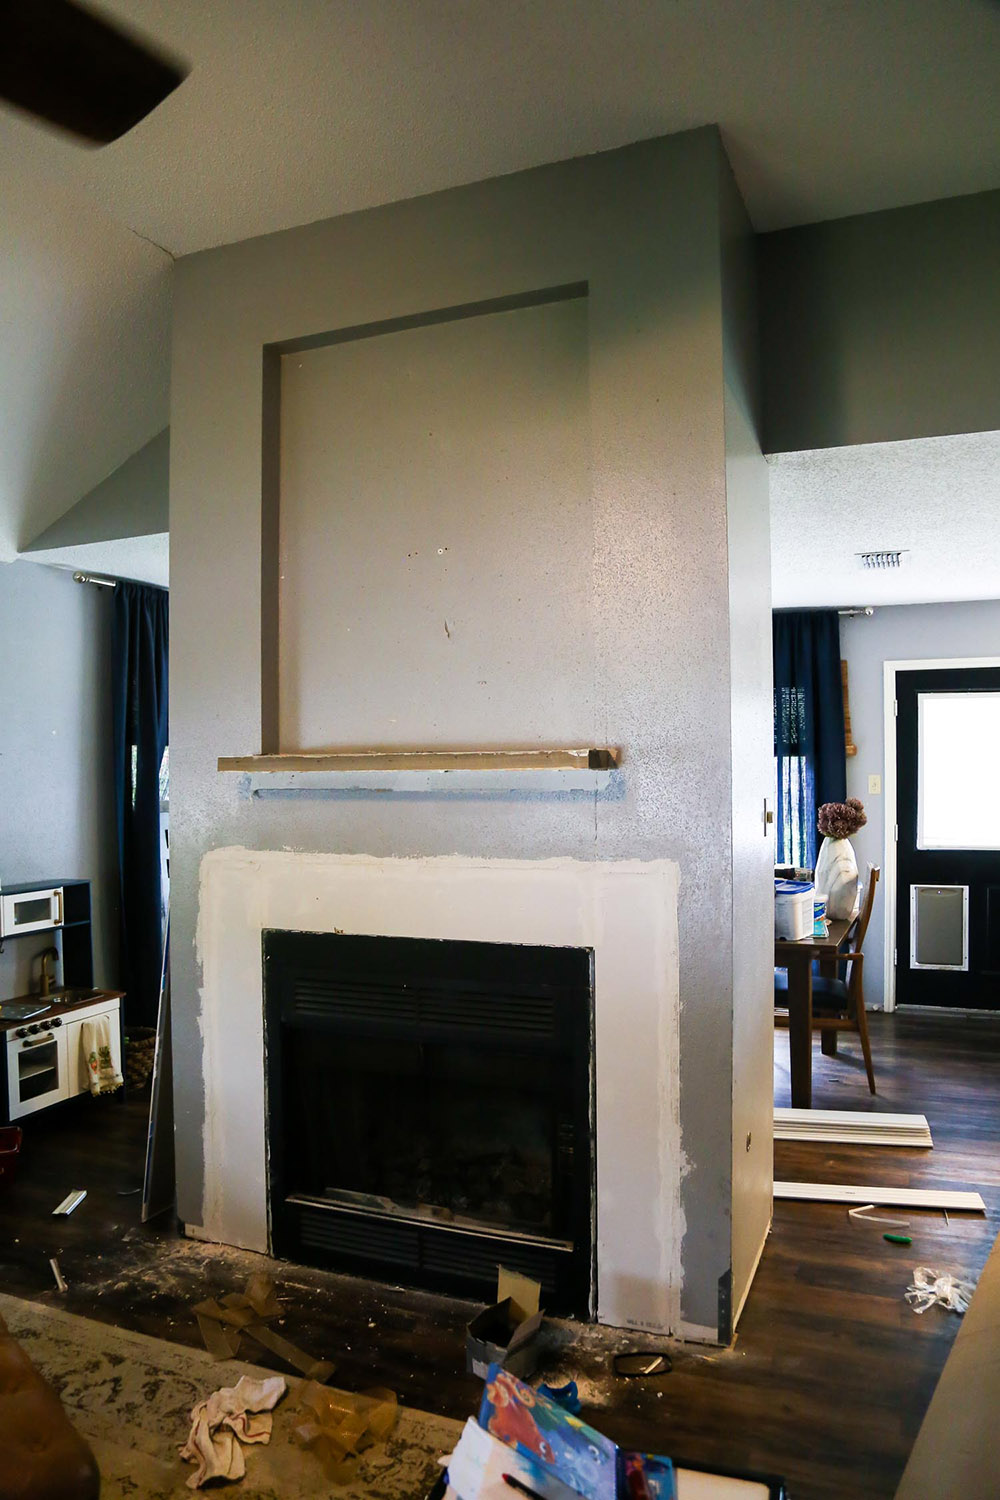 A grey and white fireplace in a living room space.